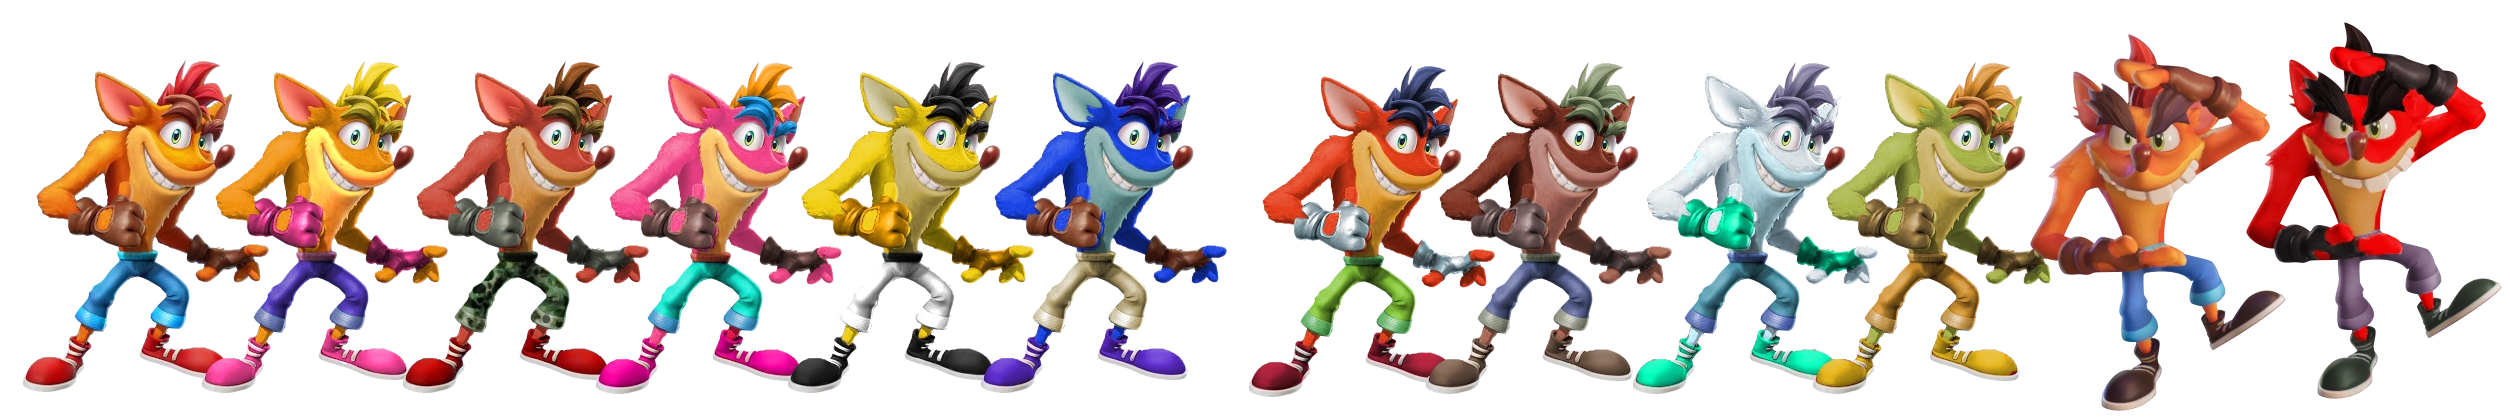 Crash Bandicoot Candidates for Smash Ultimate by DropBox5555 on